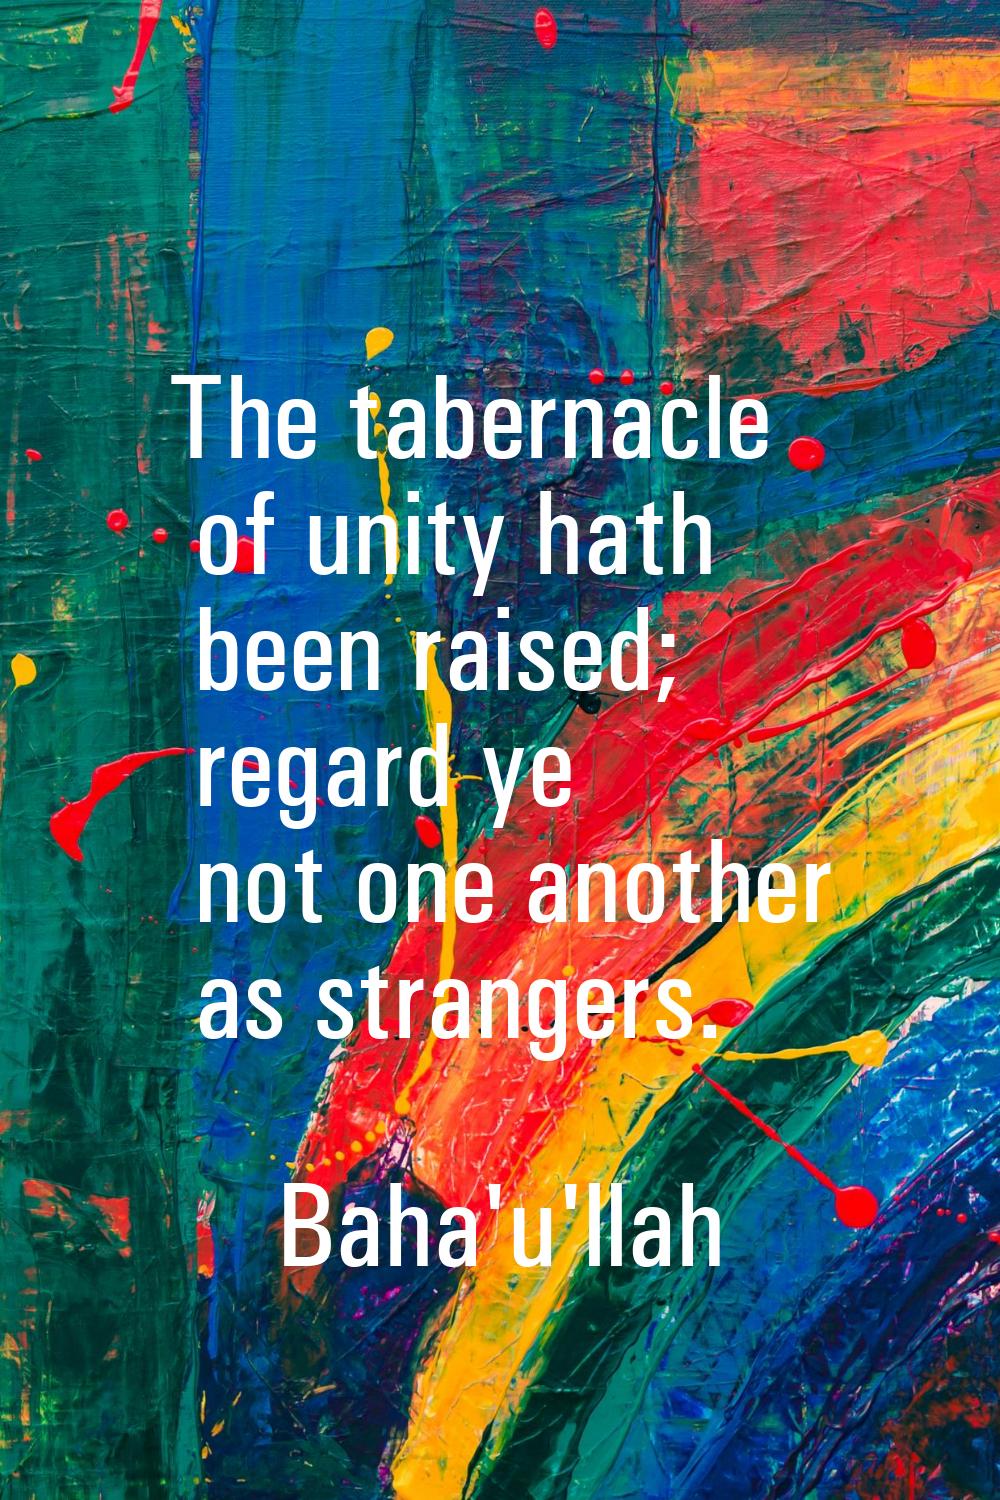 The tabernacle of unity hath been raised; regard ye not one another as strangers.